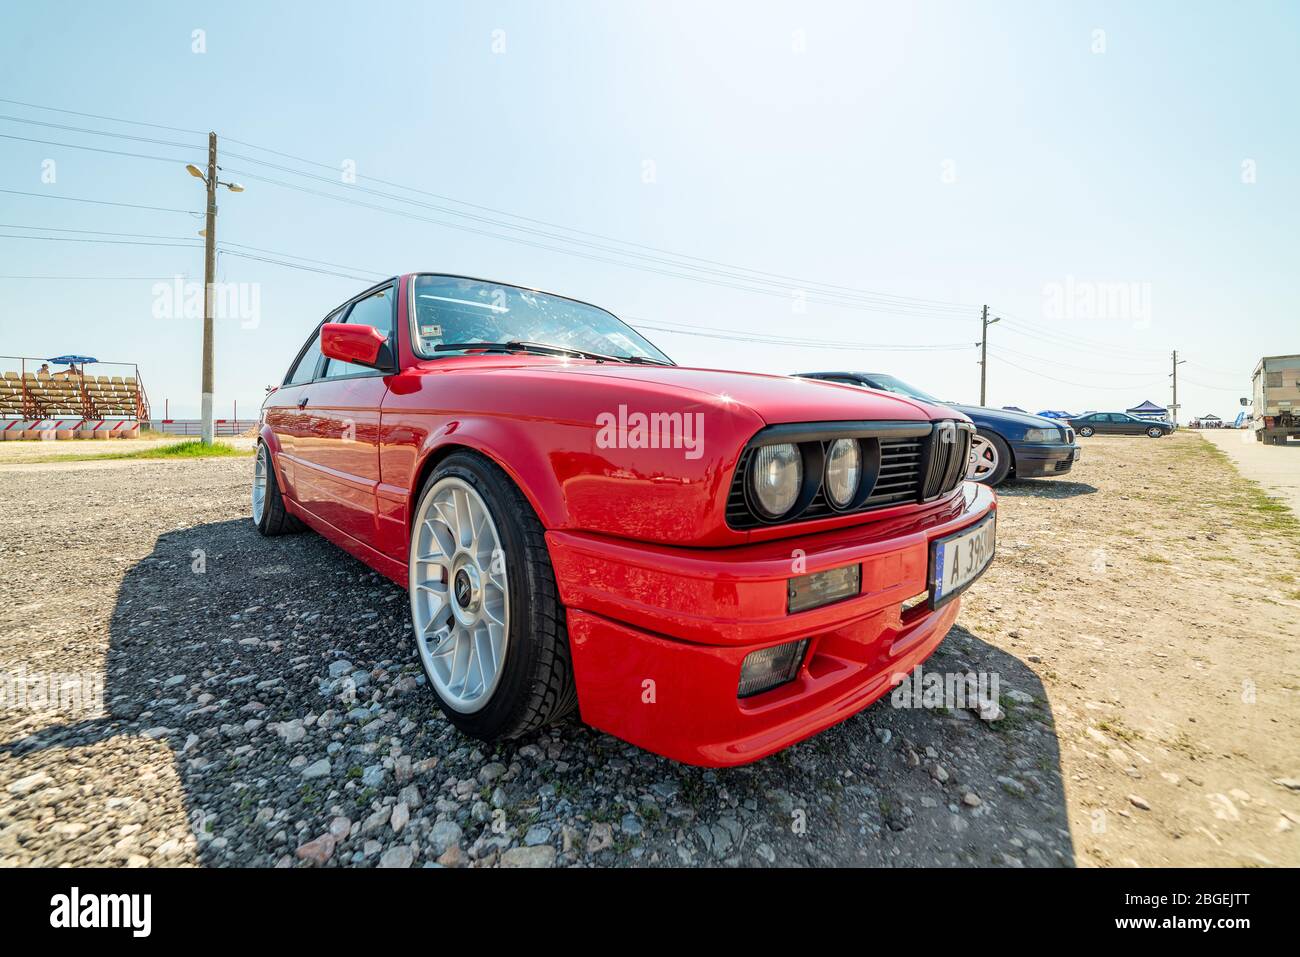 Red Bmw 0 Car High Resolution Stock Photography And Images Alamy